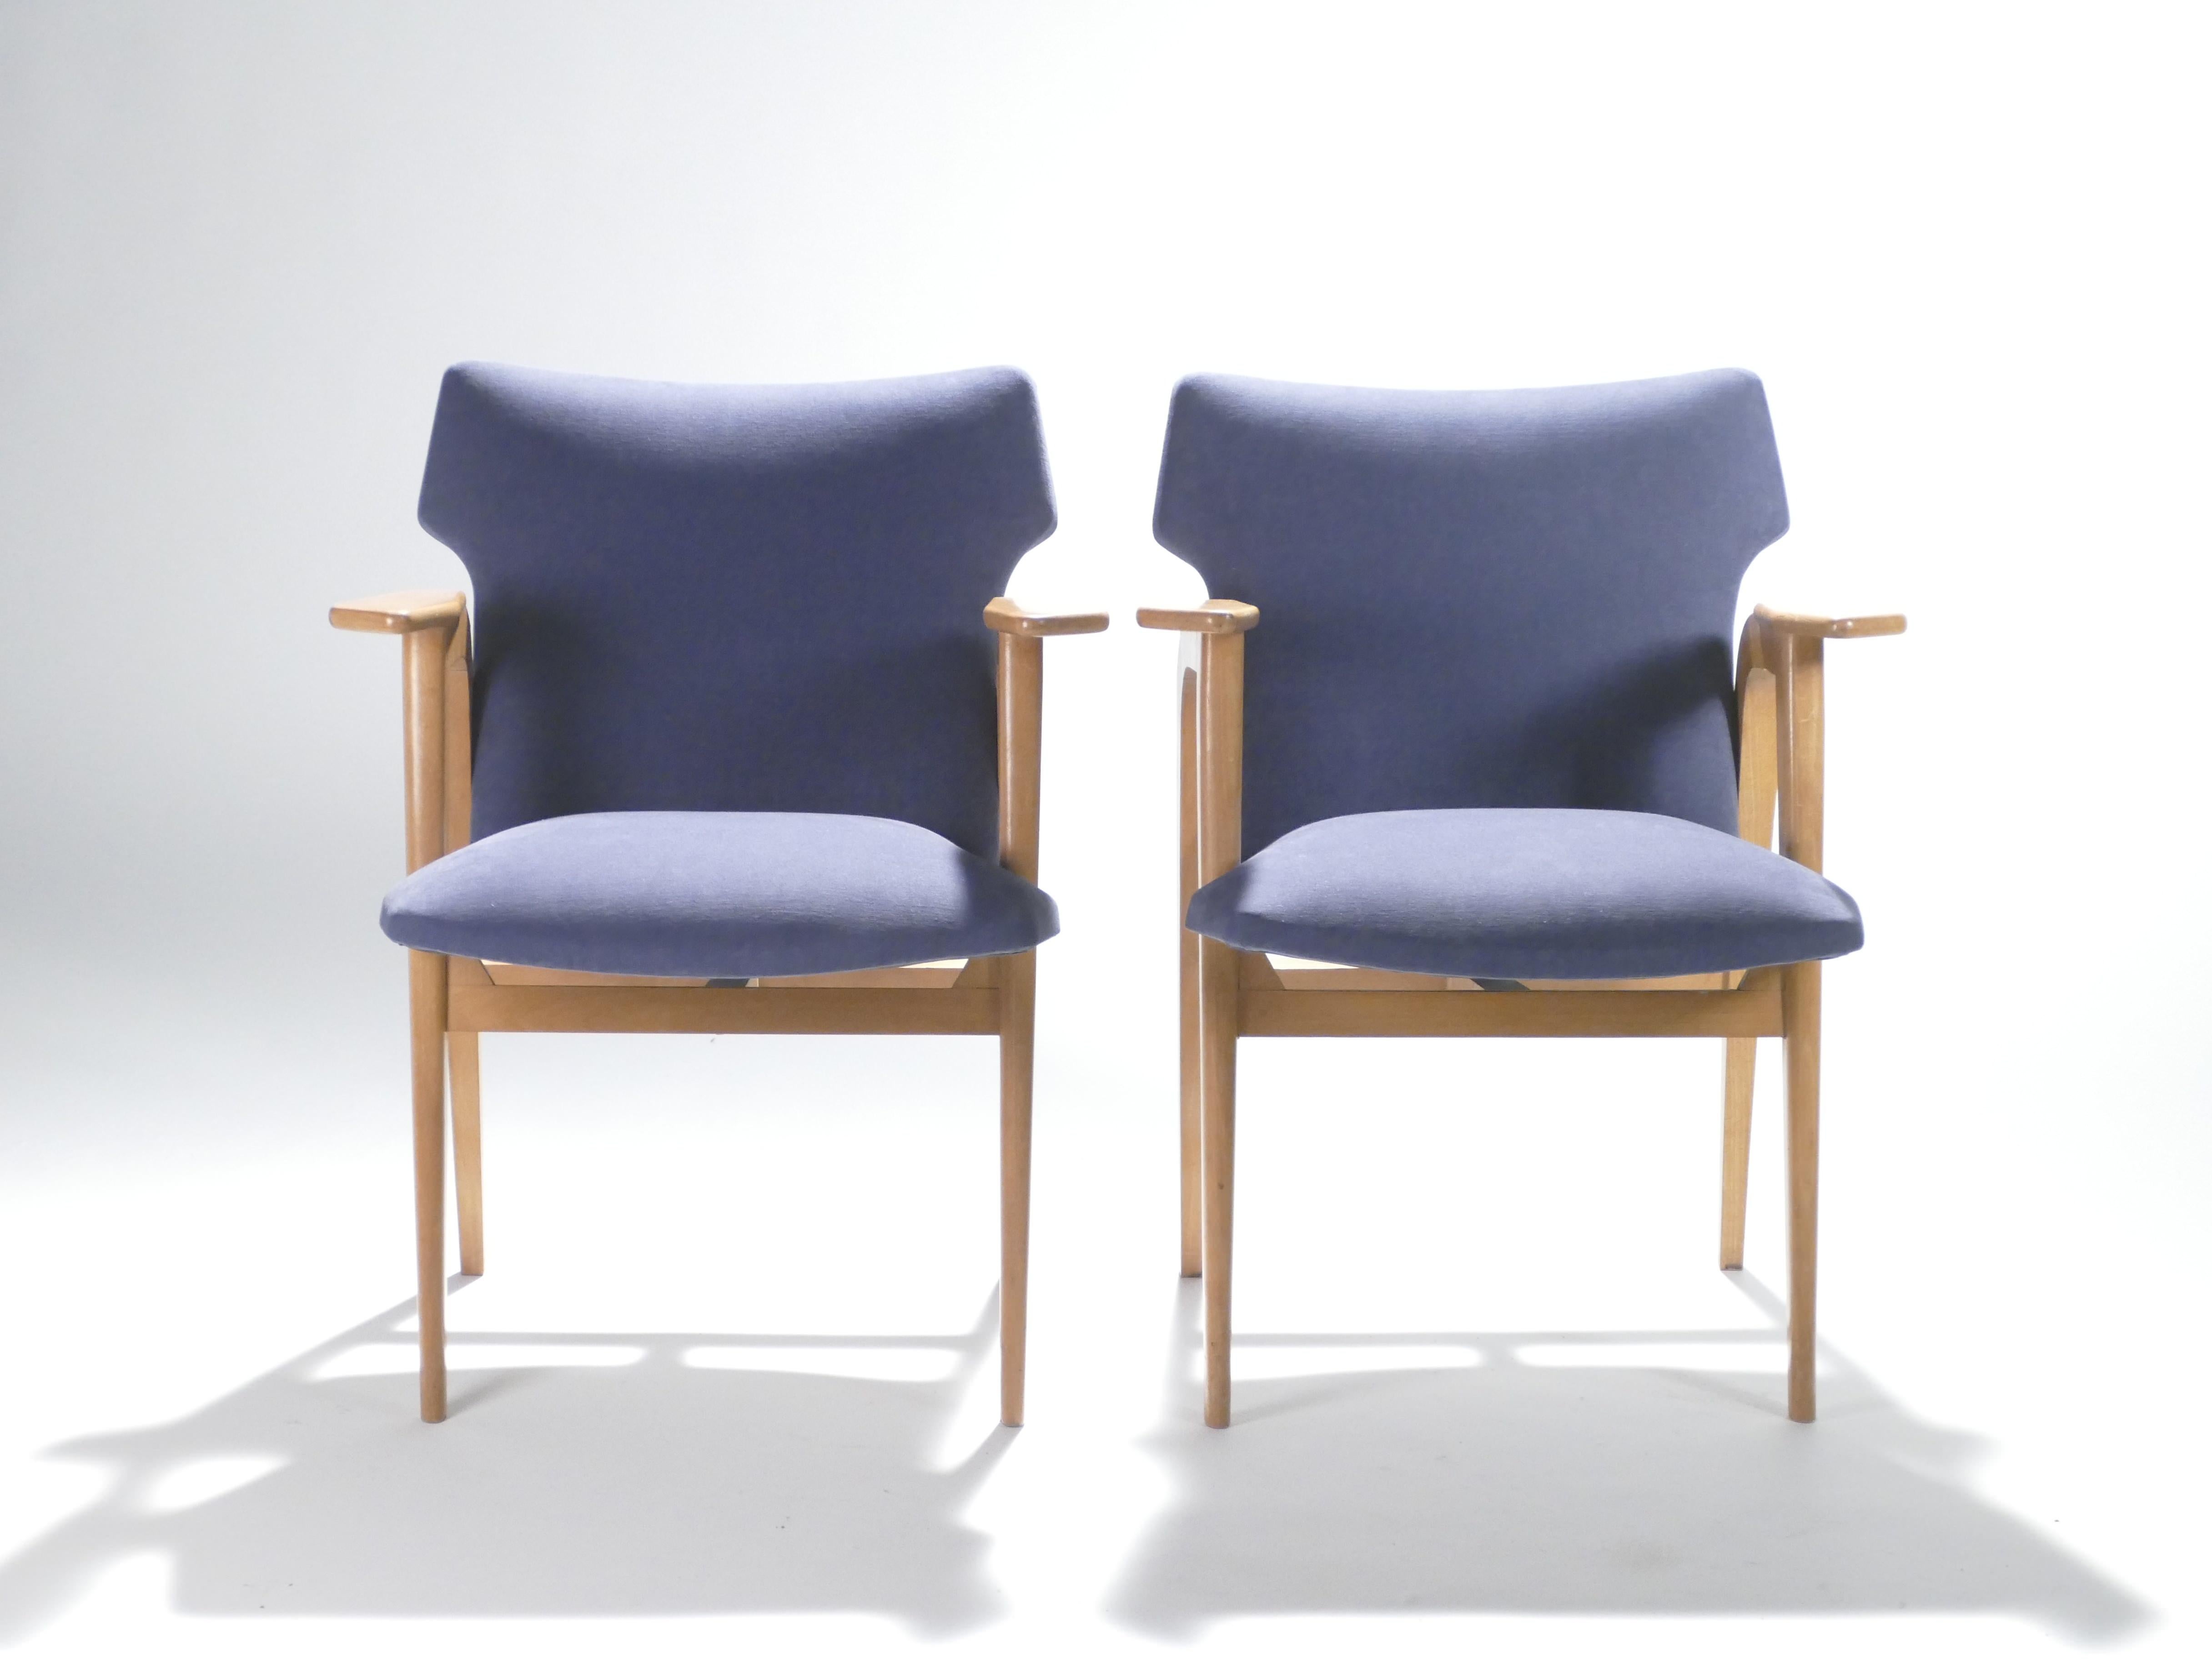 These elegant compass armchairs are sure to add an element of modernist glamor to any room in your home. Designed by Roger Landault in the late 1950s, with shapely solid oak frames, these armchairs are wonderful examples of midcentury French